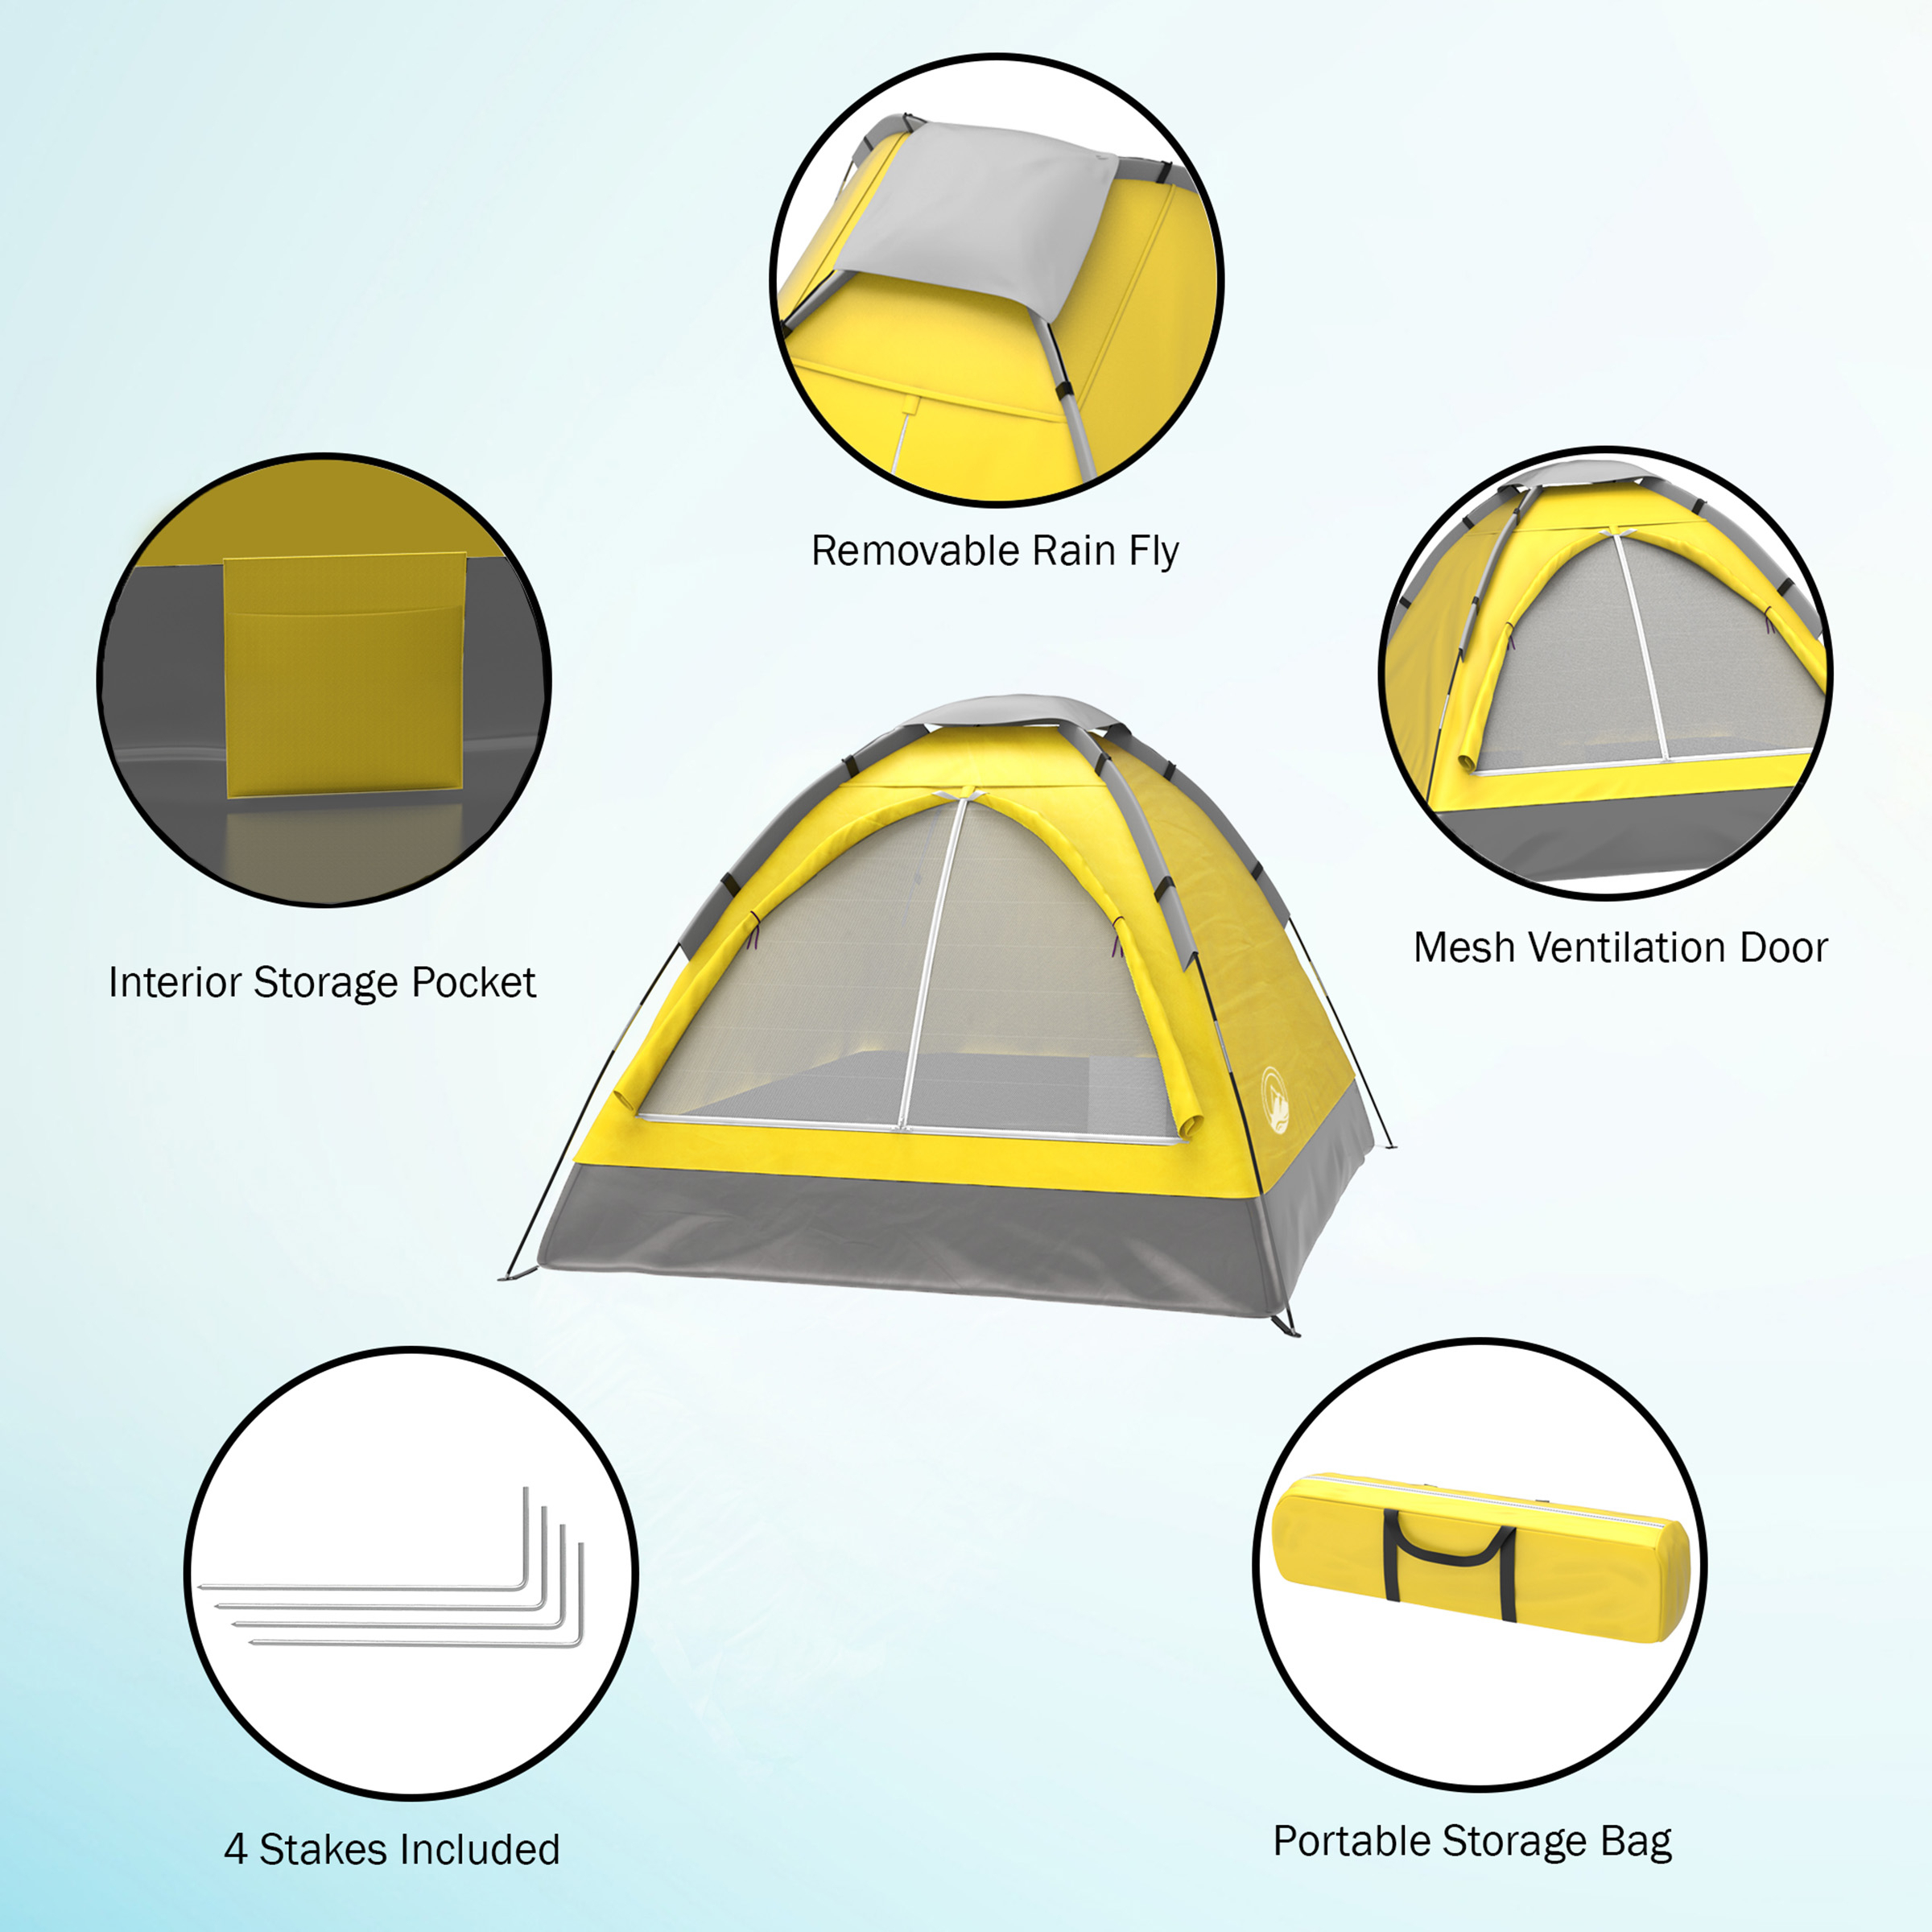 Camping Sleeping Tent Two Person 2 Man Yellow Tent Carry Bag Kids Adult Camping Easy Assembly